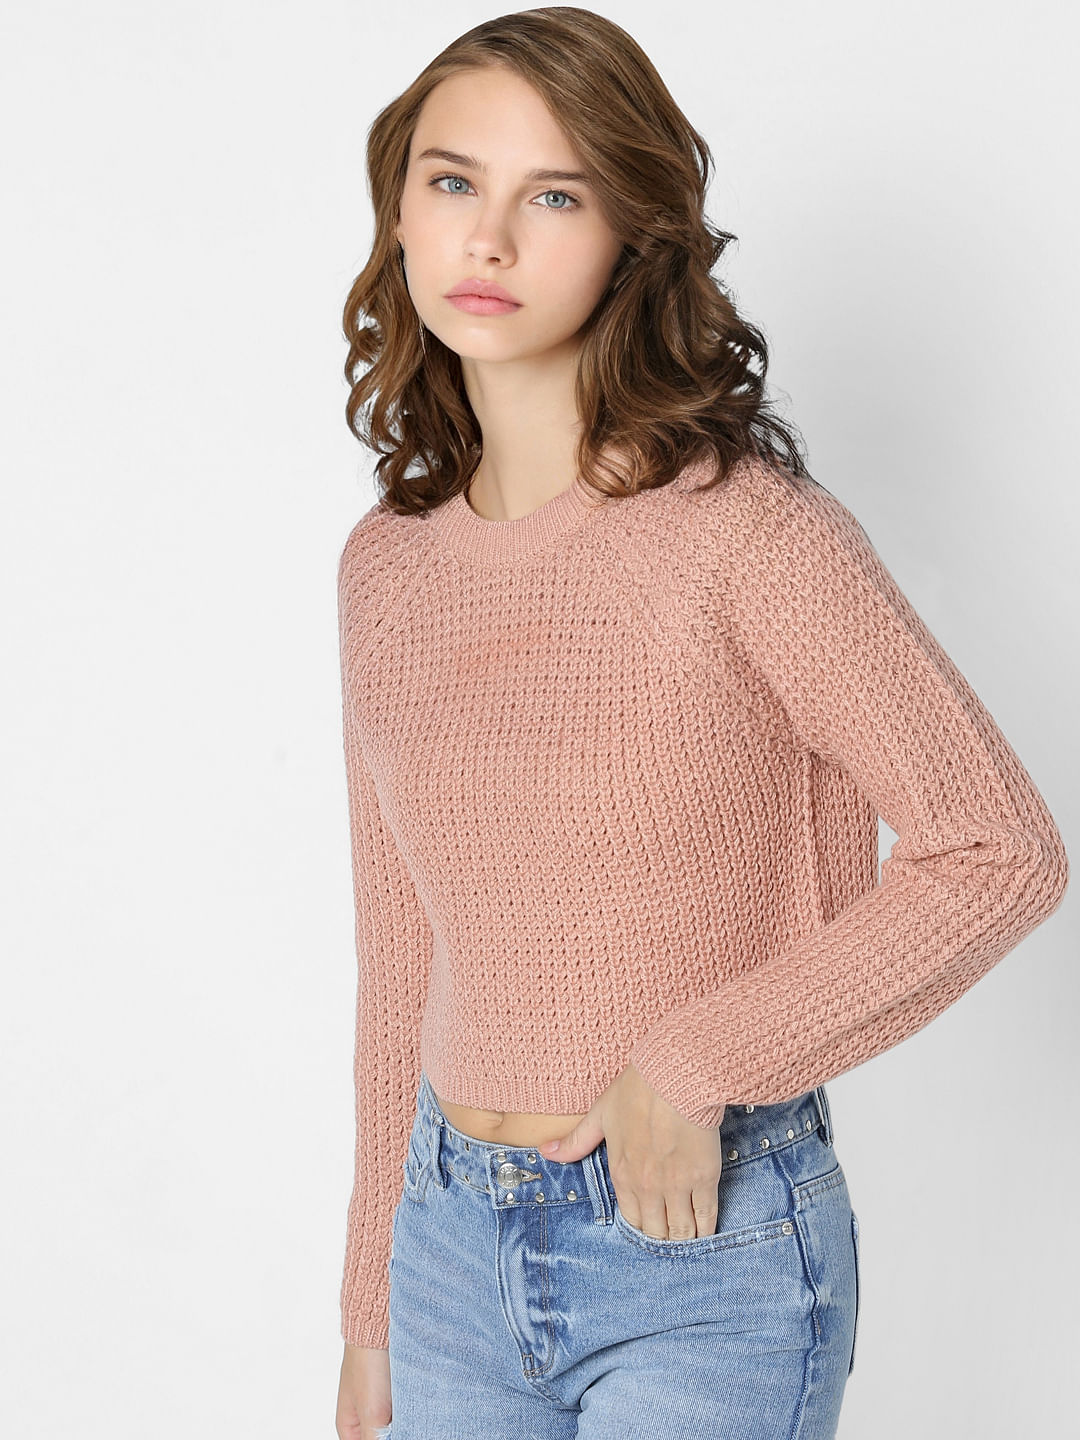 Mode Pullover Cashmerepullover womens Knitwear 